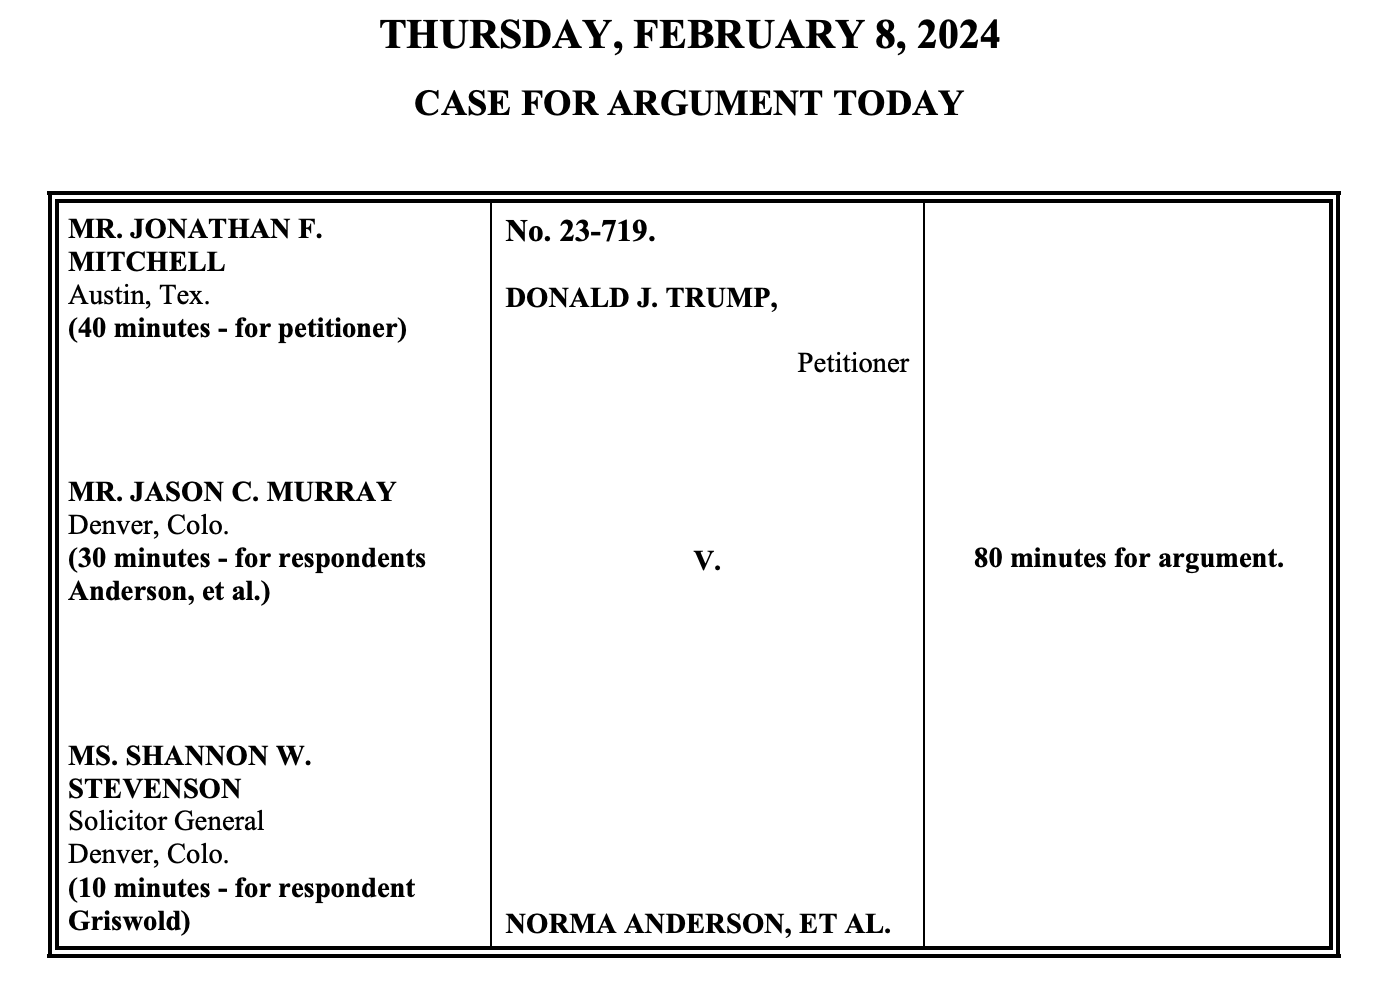 THURSDAY, FEBRUARY 8, 2024 CASE FOR ARGUMENT TODAY MR. JONATHAN F. No. 23-719. MITCHELL Austin, Tex. DONALD J. TRUMP, (40 minutes - for petitioner) Petitioner MR. JASON C. MURRAY Denver, Colo. (30 minutes - for respondents V. 80 minutes for argument. Anderson, et al.) MS. SHANNON W. STEVENSON Solicitor General Denver, Colo. (10 minutes - for respondent Griswold) NORMA ANDERSON, ET AL.